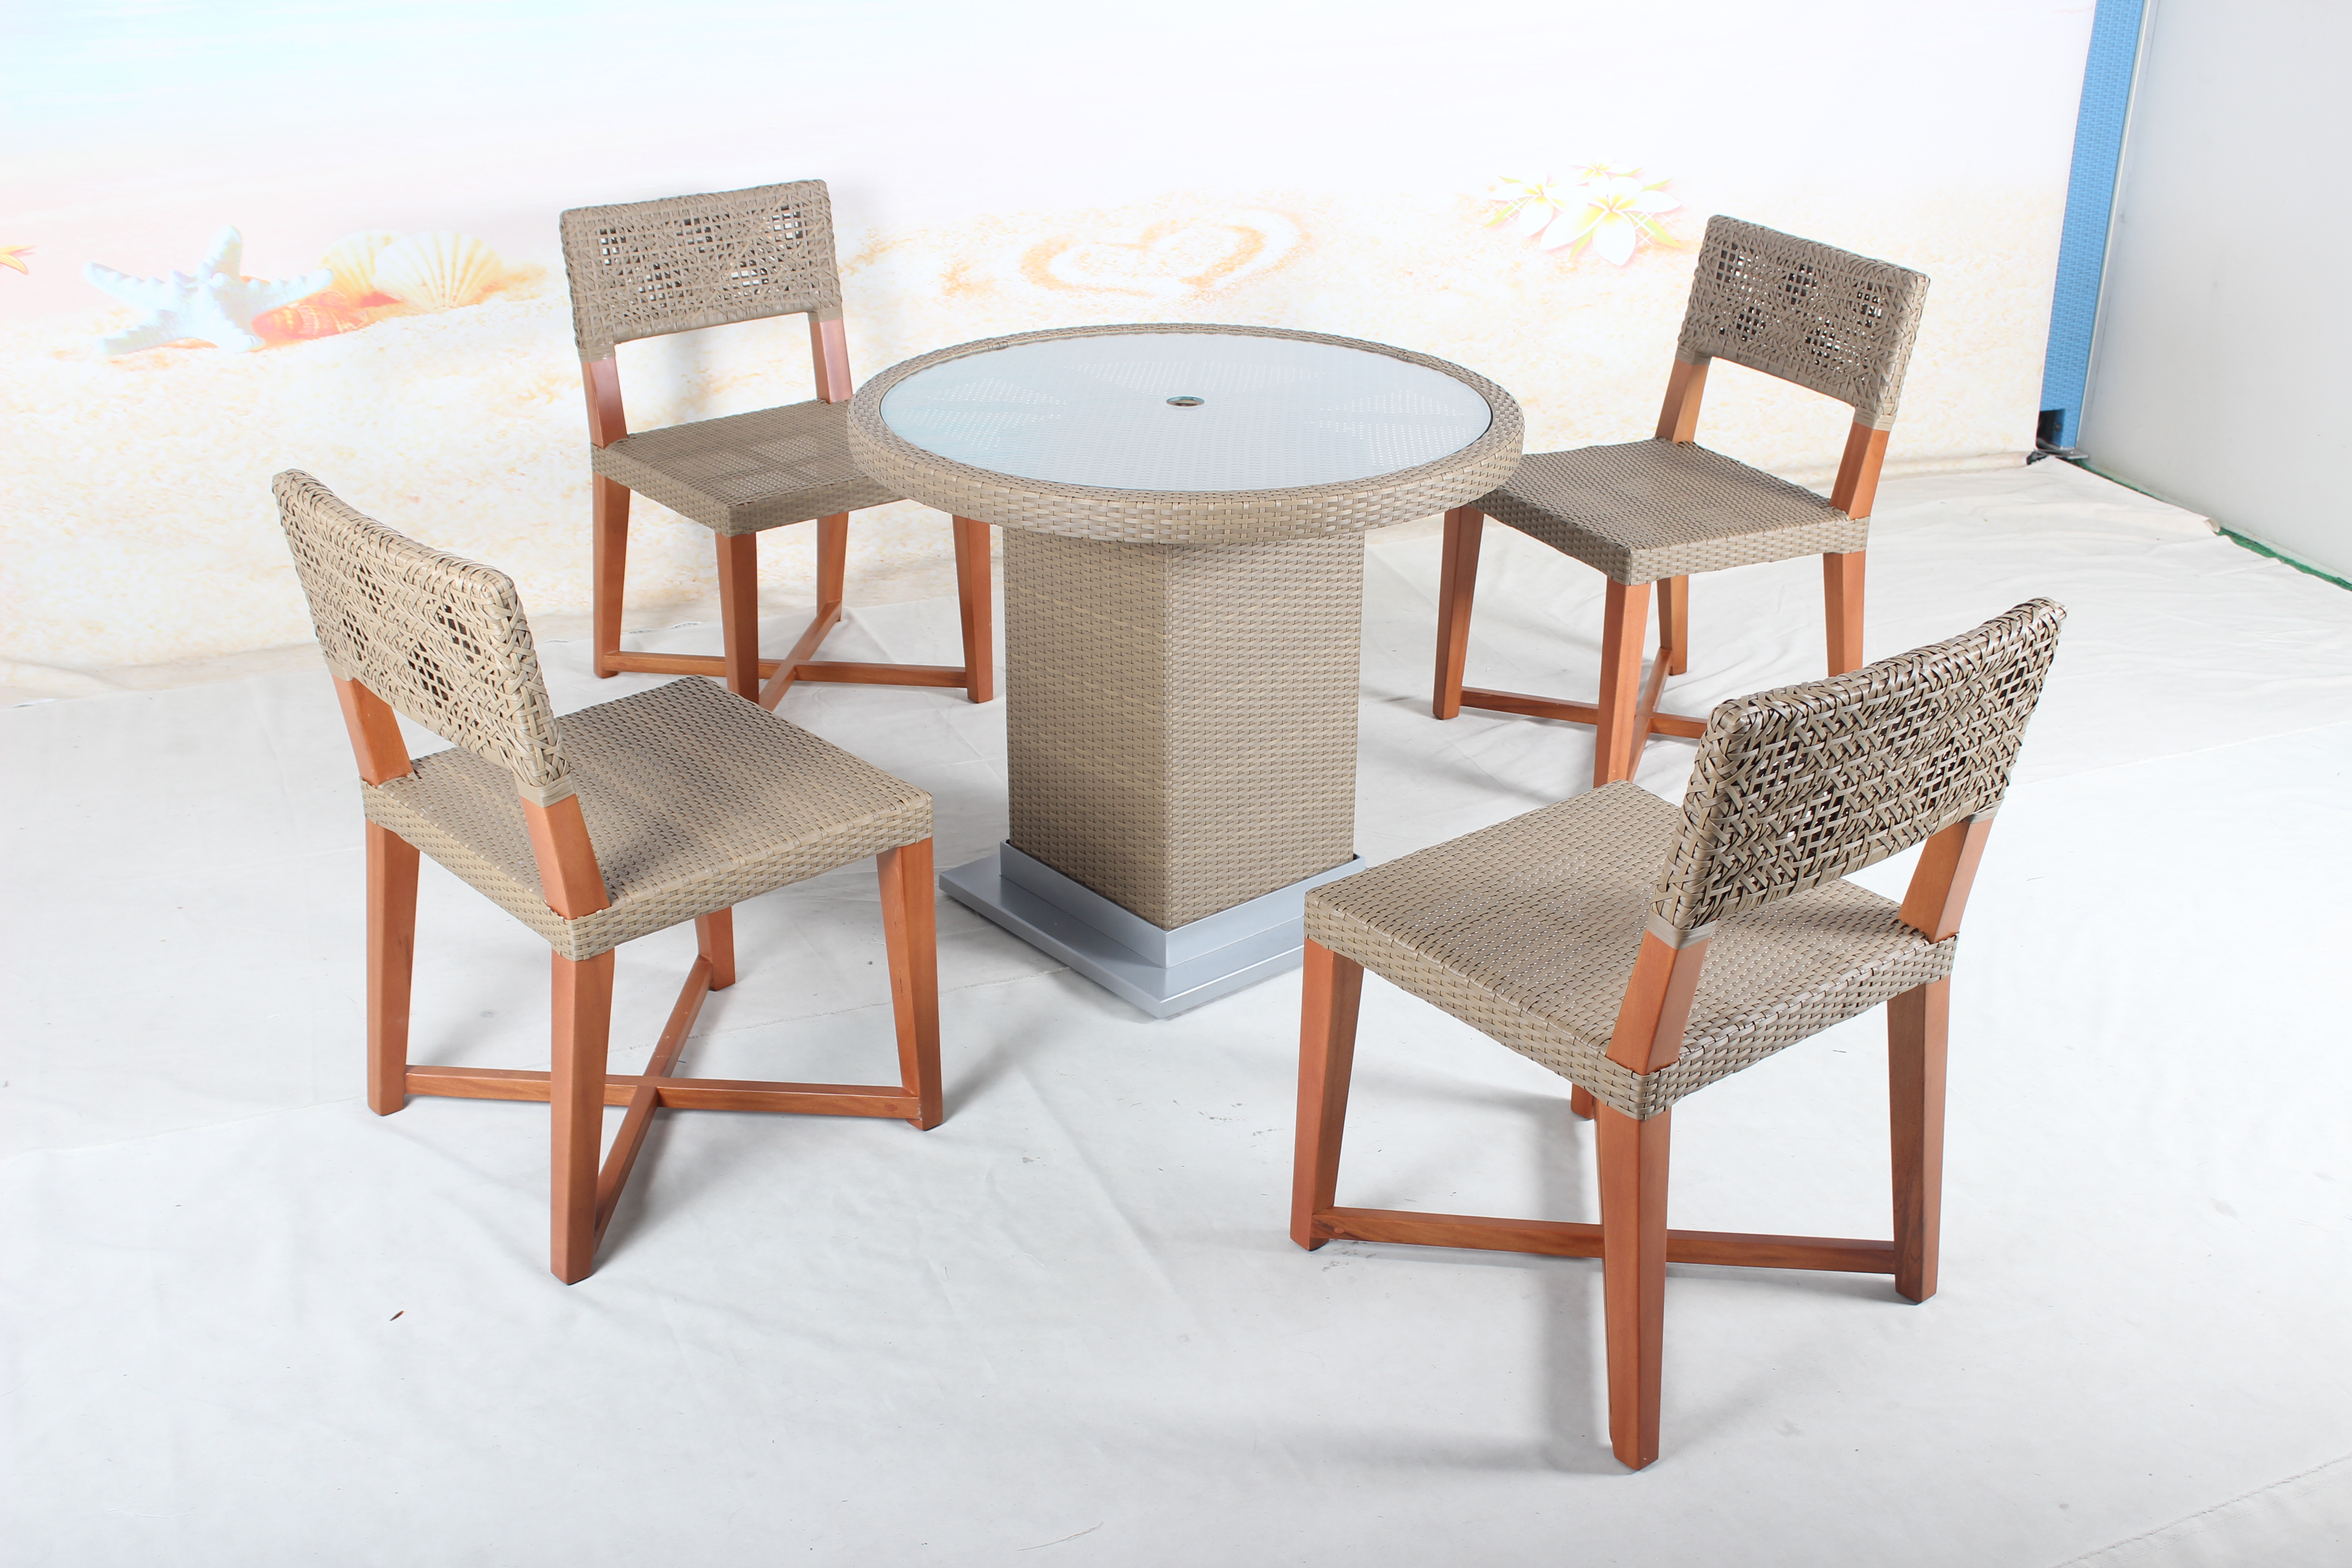 5 pieces outdoor teakwood rattan table and chair set